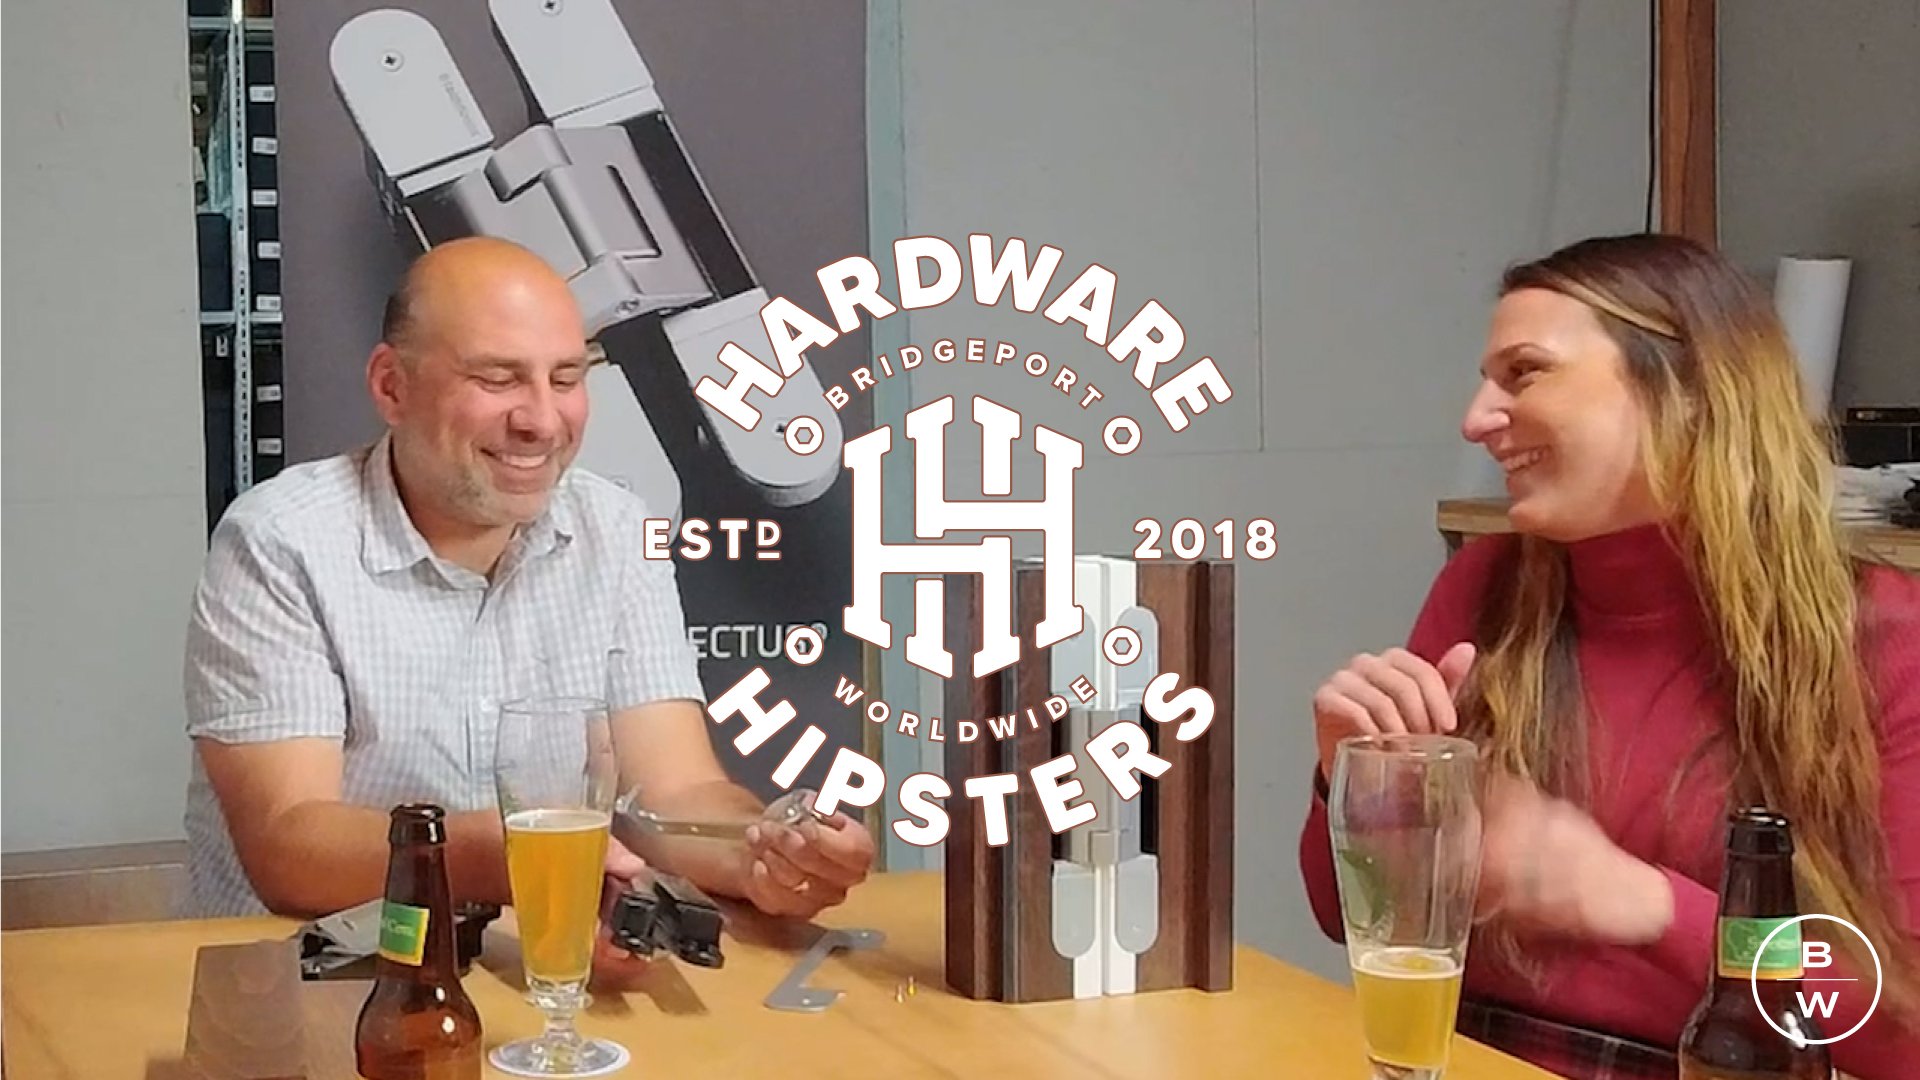 Hardware Hipsters Glad 2B Clad